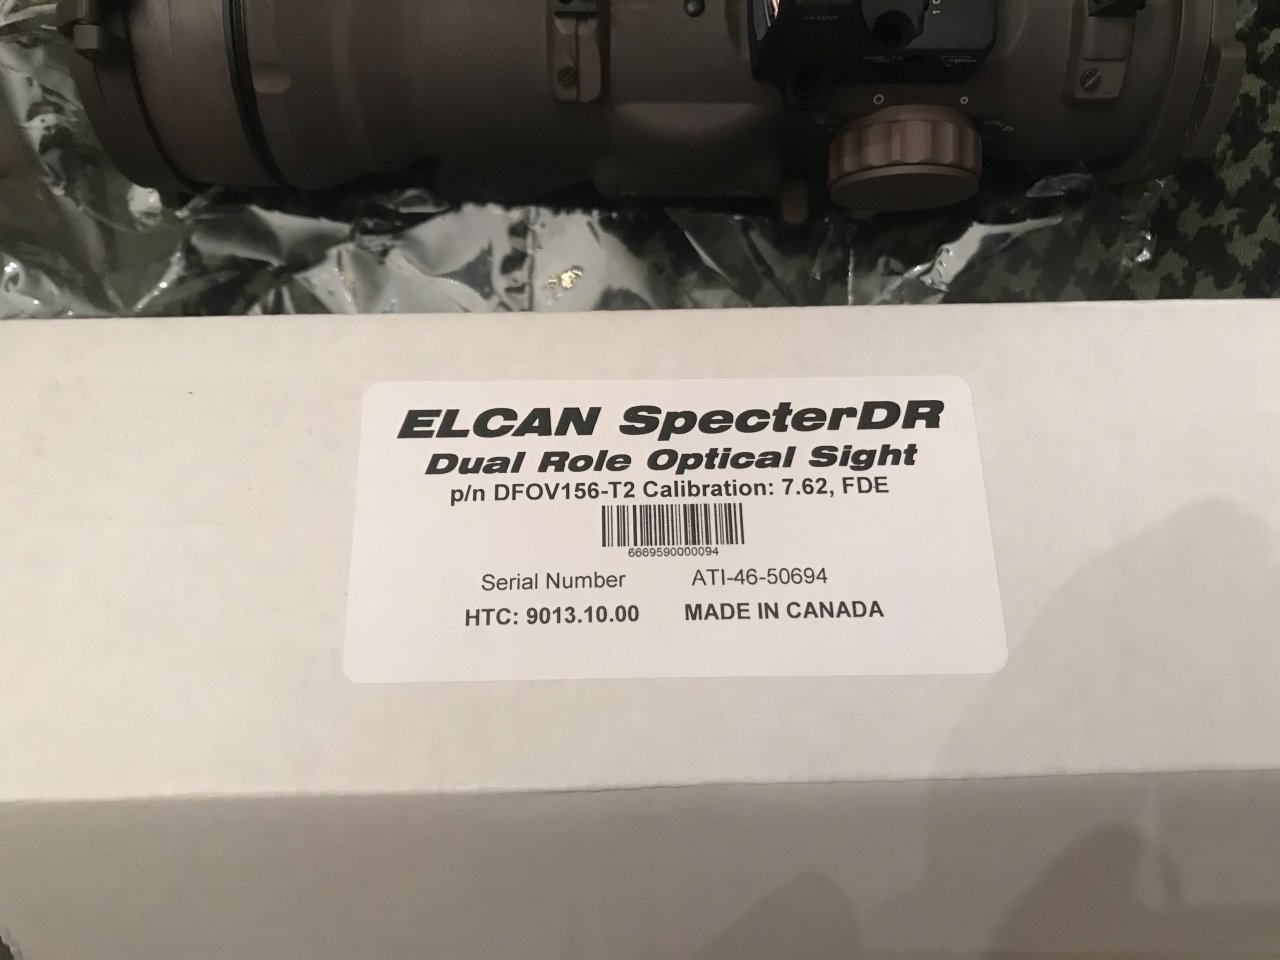 ELCAN - DFOV156-T2 - SpecterDR - 1.5/6 in FDE 7.62 I literally just unwrapped this for the pictures, Its brand new, I have the RMR mount and a RMR06 With RMR - $2300 Without - $1950